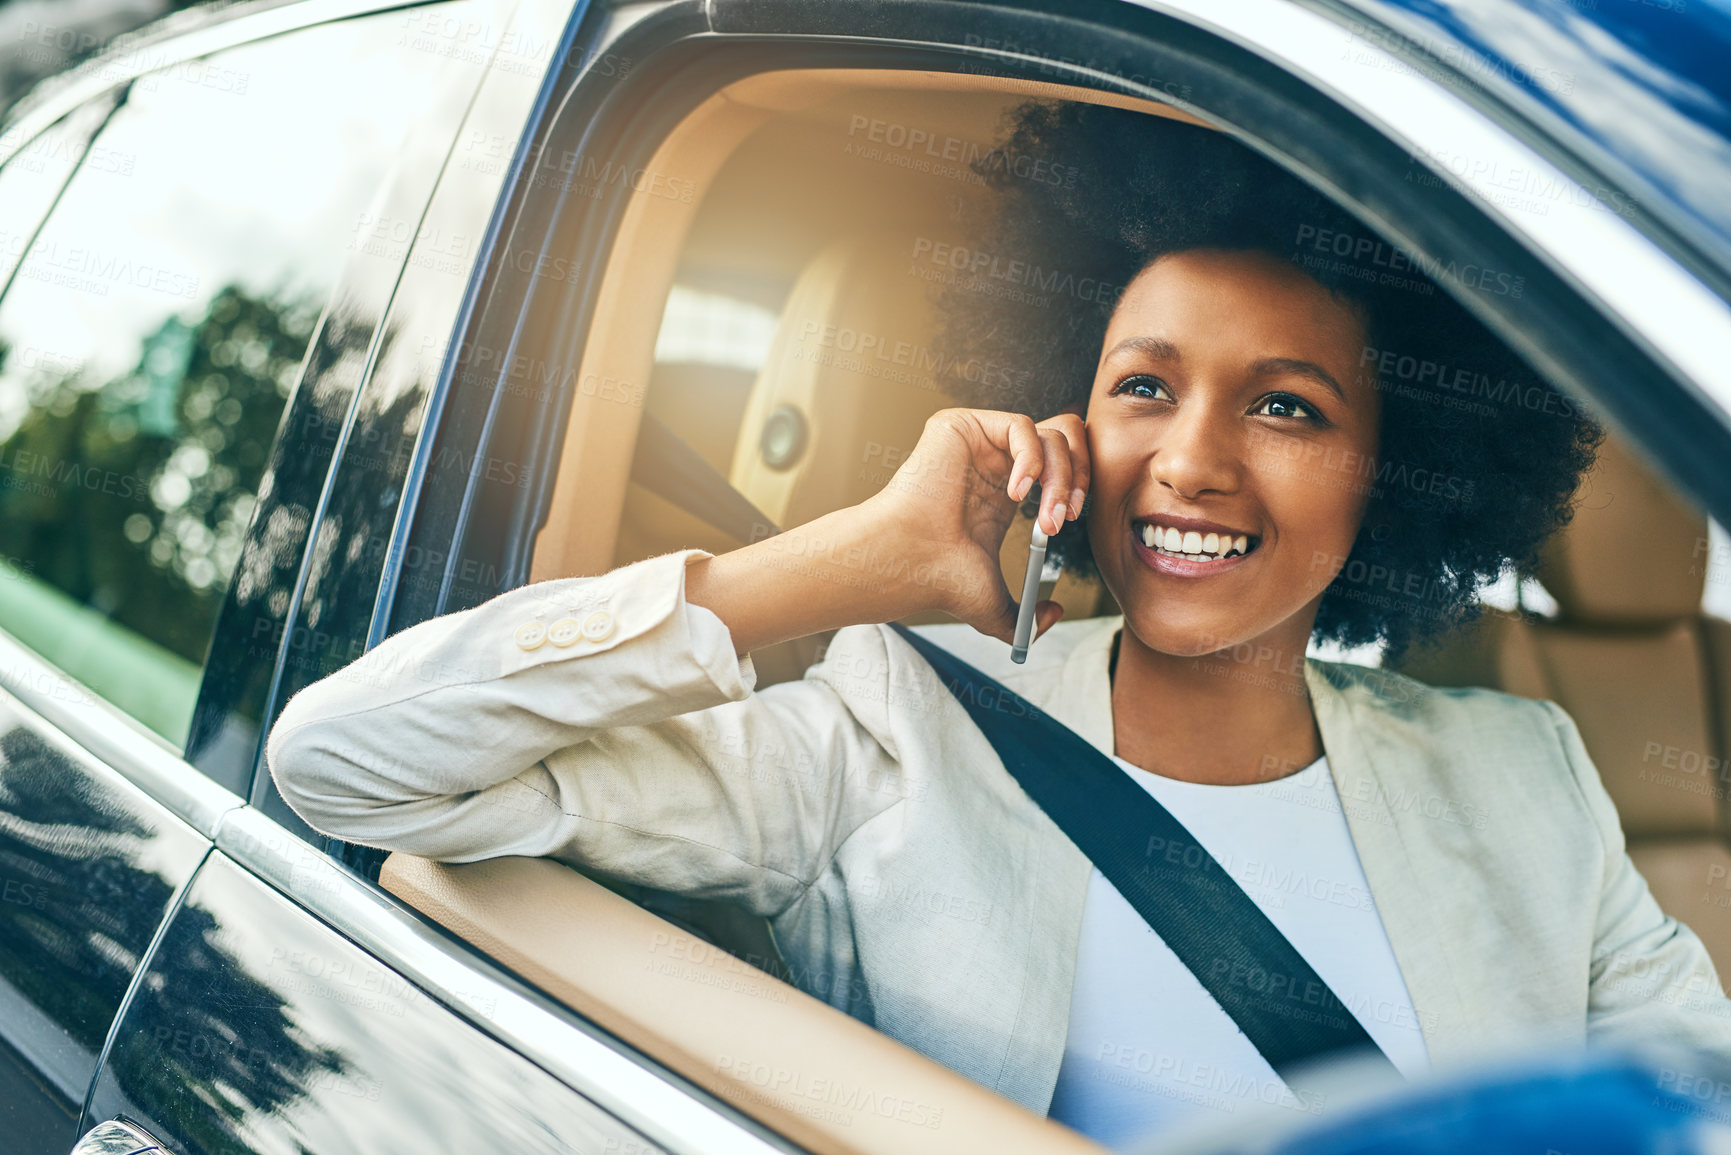 Buy stock photo Shot of a cheerful young businesswoman driving in a car on her way to work while talking on a cellphone during the day